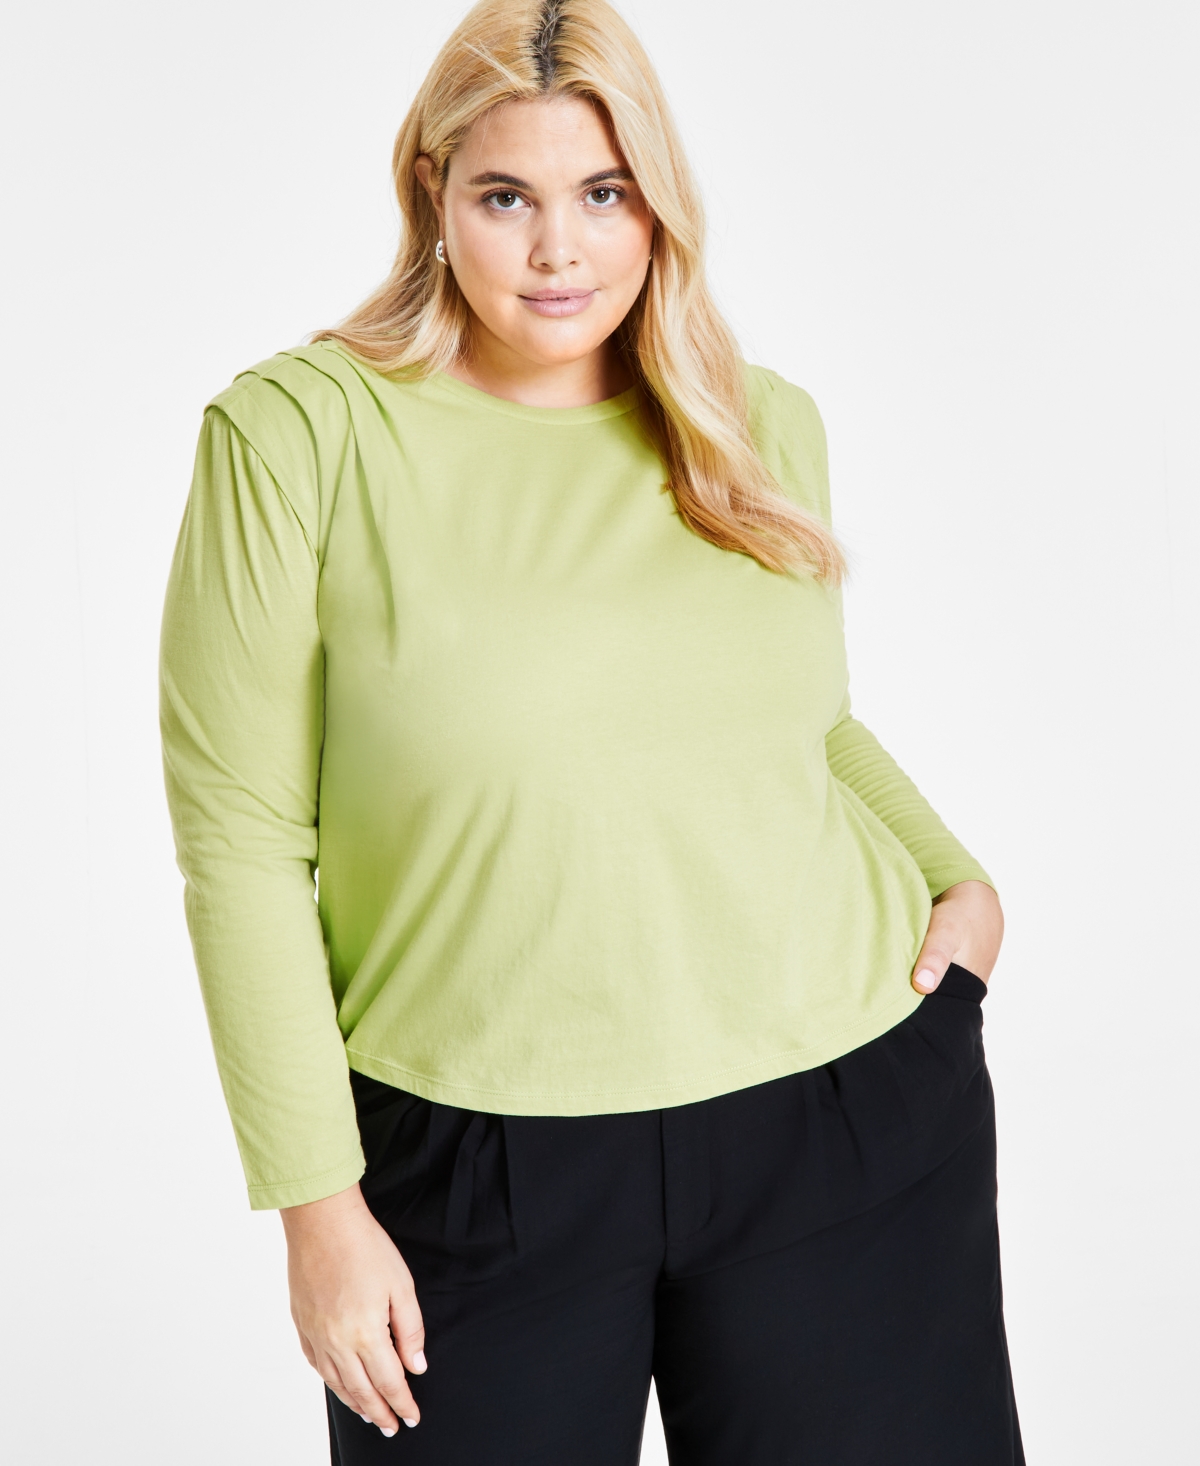 Plus Size Cotton Round-Neck Pleat-Shoulder T-Shirt, Created for Macy's - Spring Lime